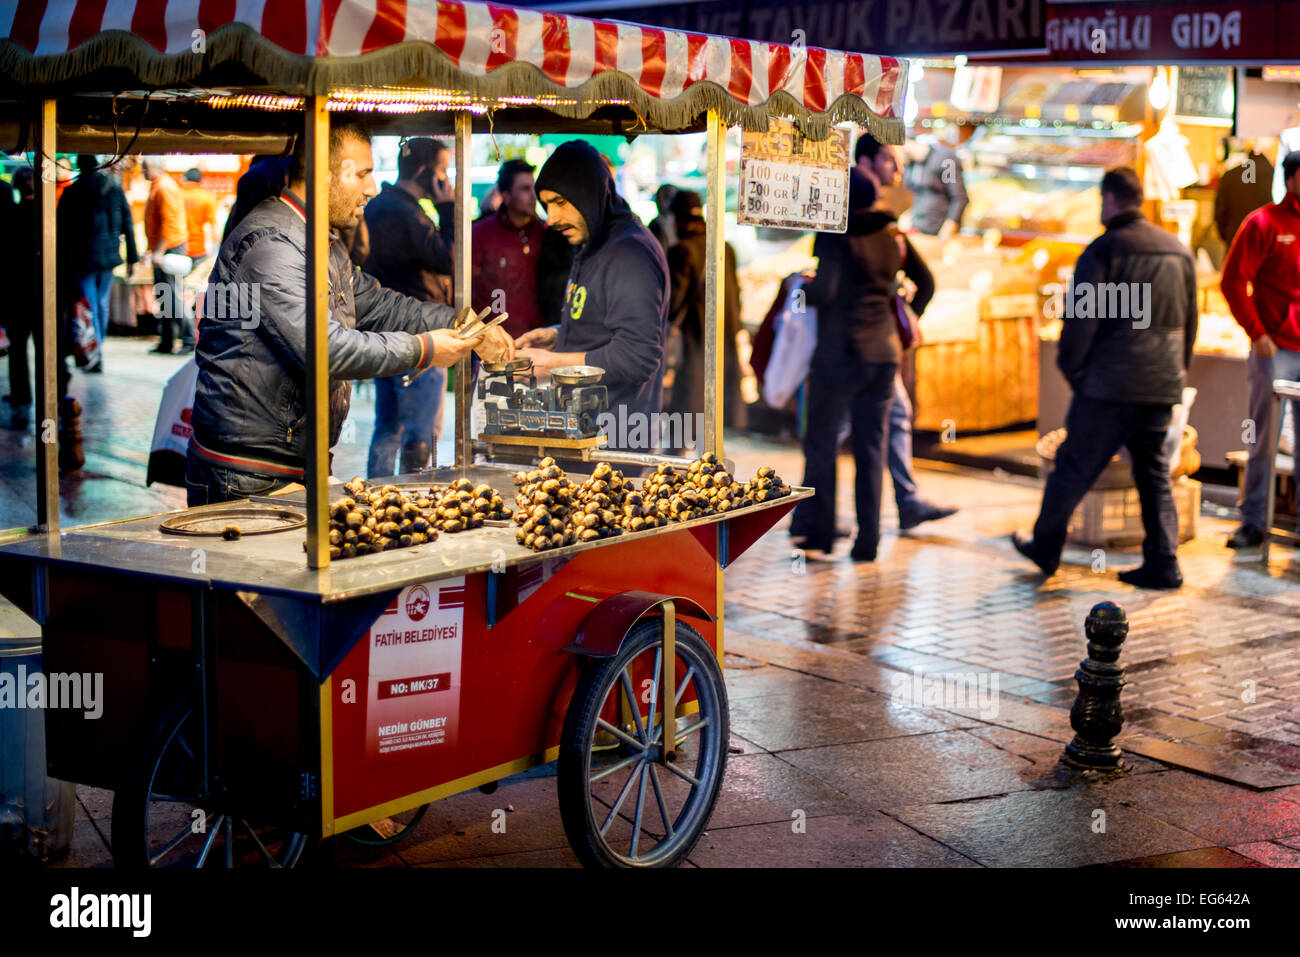 ISTANBUL, Turkey — ISTANBUL, Turkey — A man sells roasted chestnuts from his cart on the waterfront of the Eminonu district in Istanbul A historic area with a rich Ottoman past, Eminonu is the heart of old Istanbul, where traders and tourists merge in a colorful spectacle of cultural exchange. Stock Photo